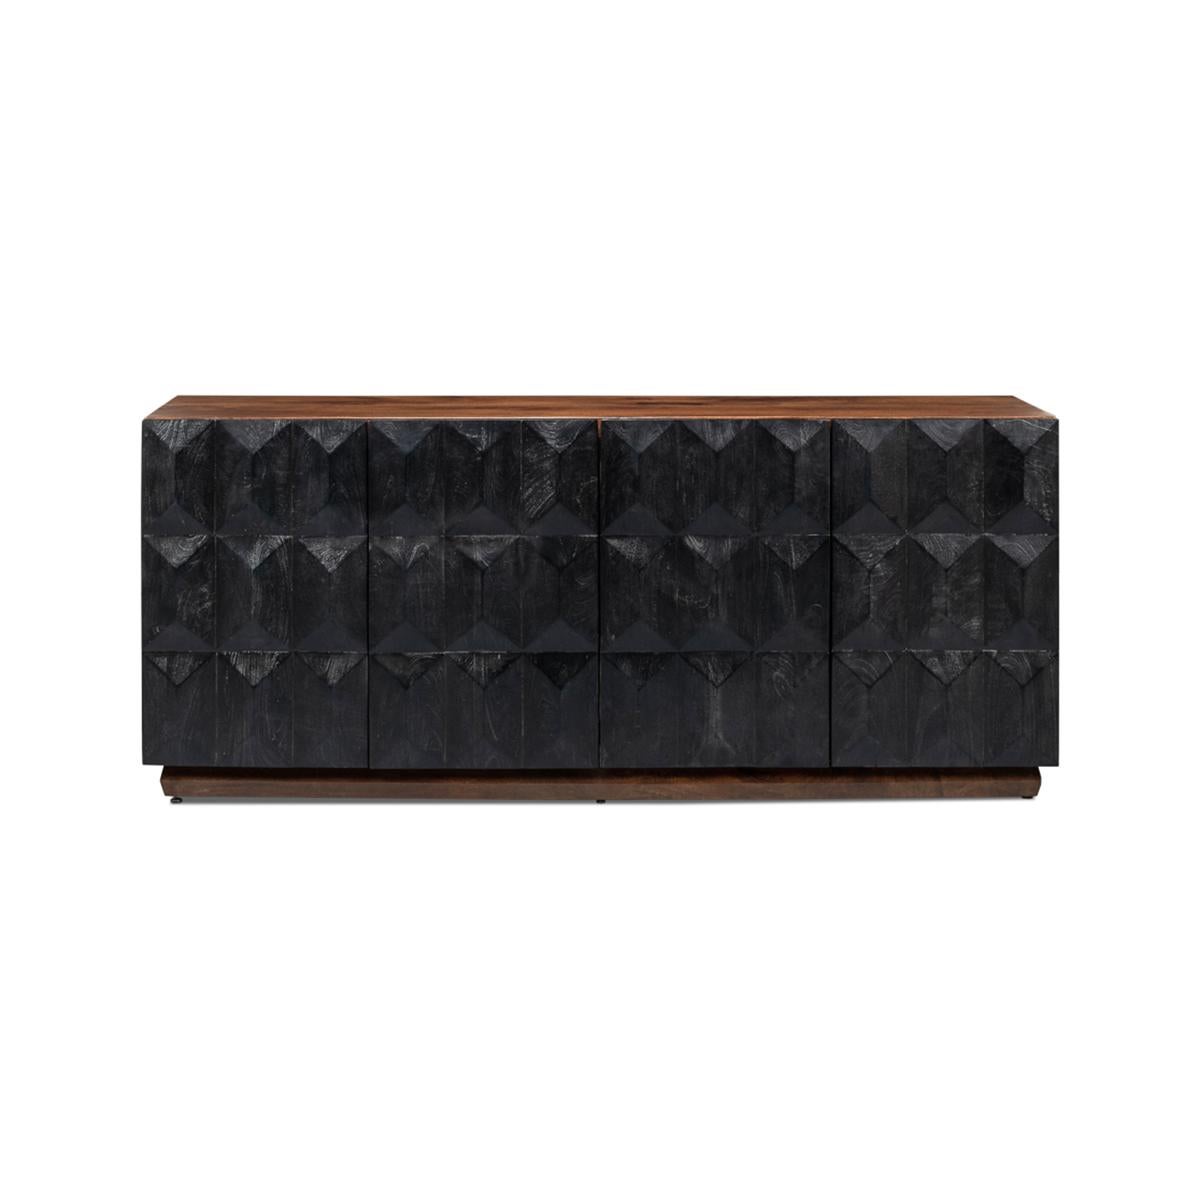 Modern Architectural sideboard, big, bold and inspired by classic Brutalism Architecture. Constructed from reclaimed wood and highlighted in a two-tone finish, the attention to detail on this item is second to none. Texture, architectural